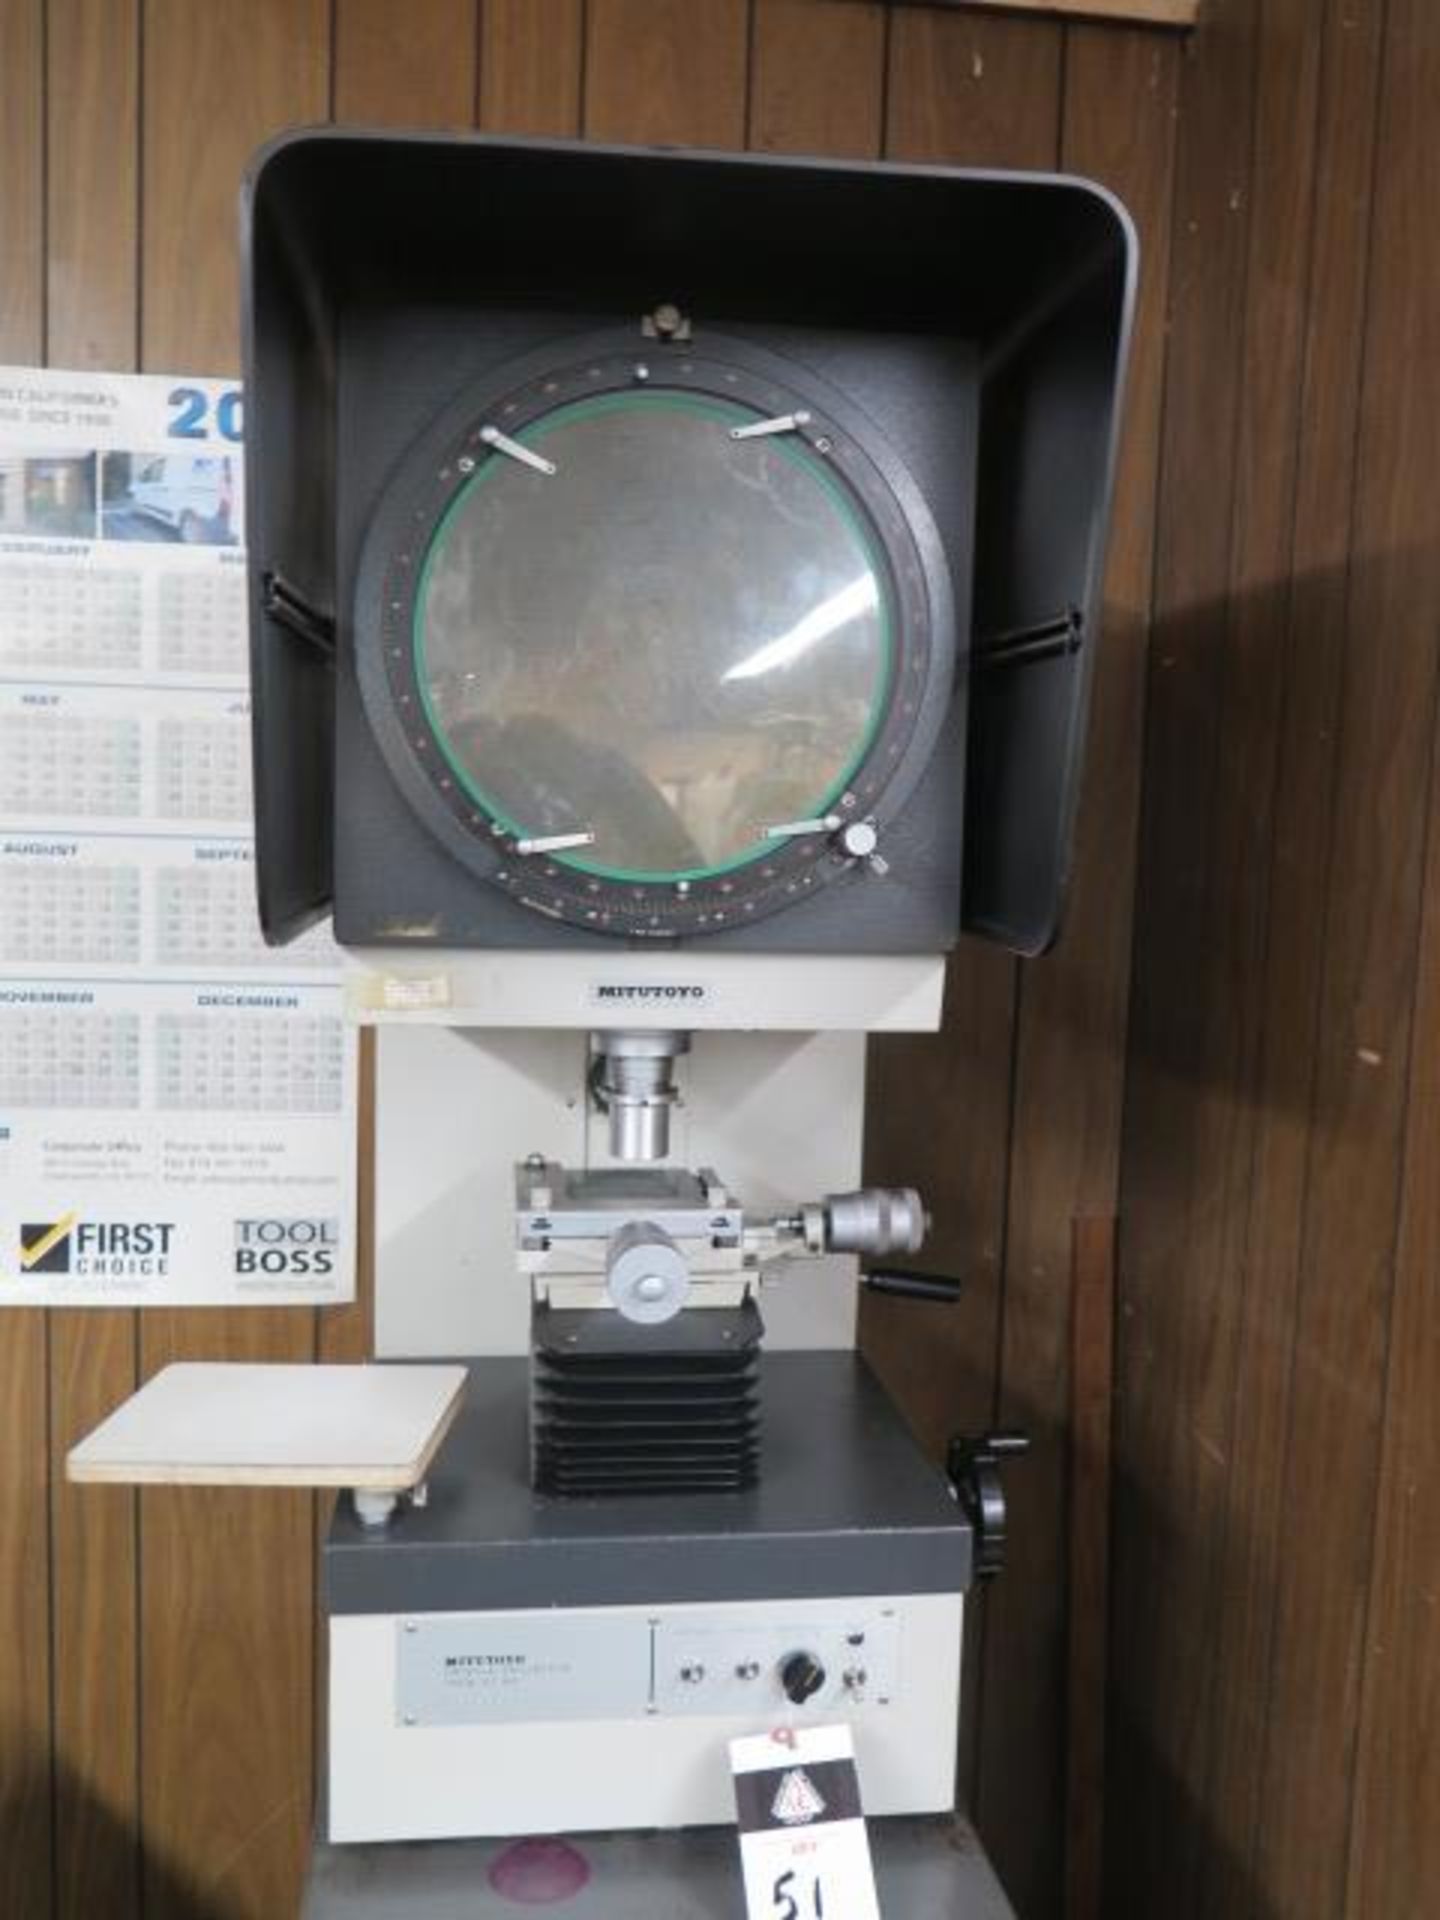 Mitutoyo PJ-300 12” Optical Comparator s/n 7353 w/ Surface and Profile Illumination (SOLD AS-IS - NO